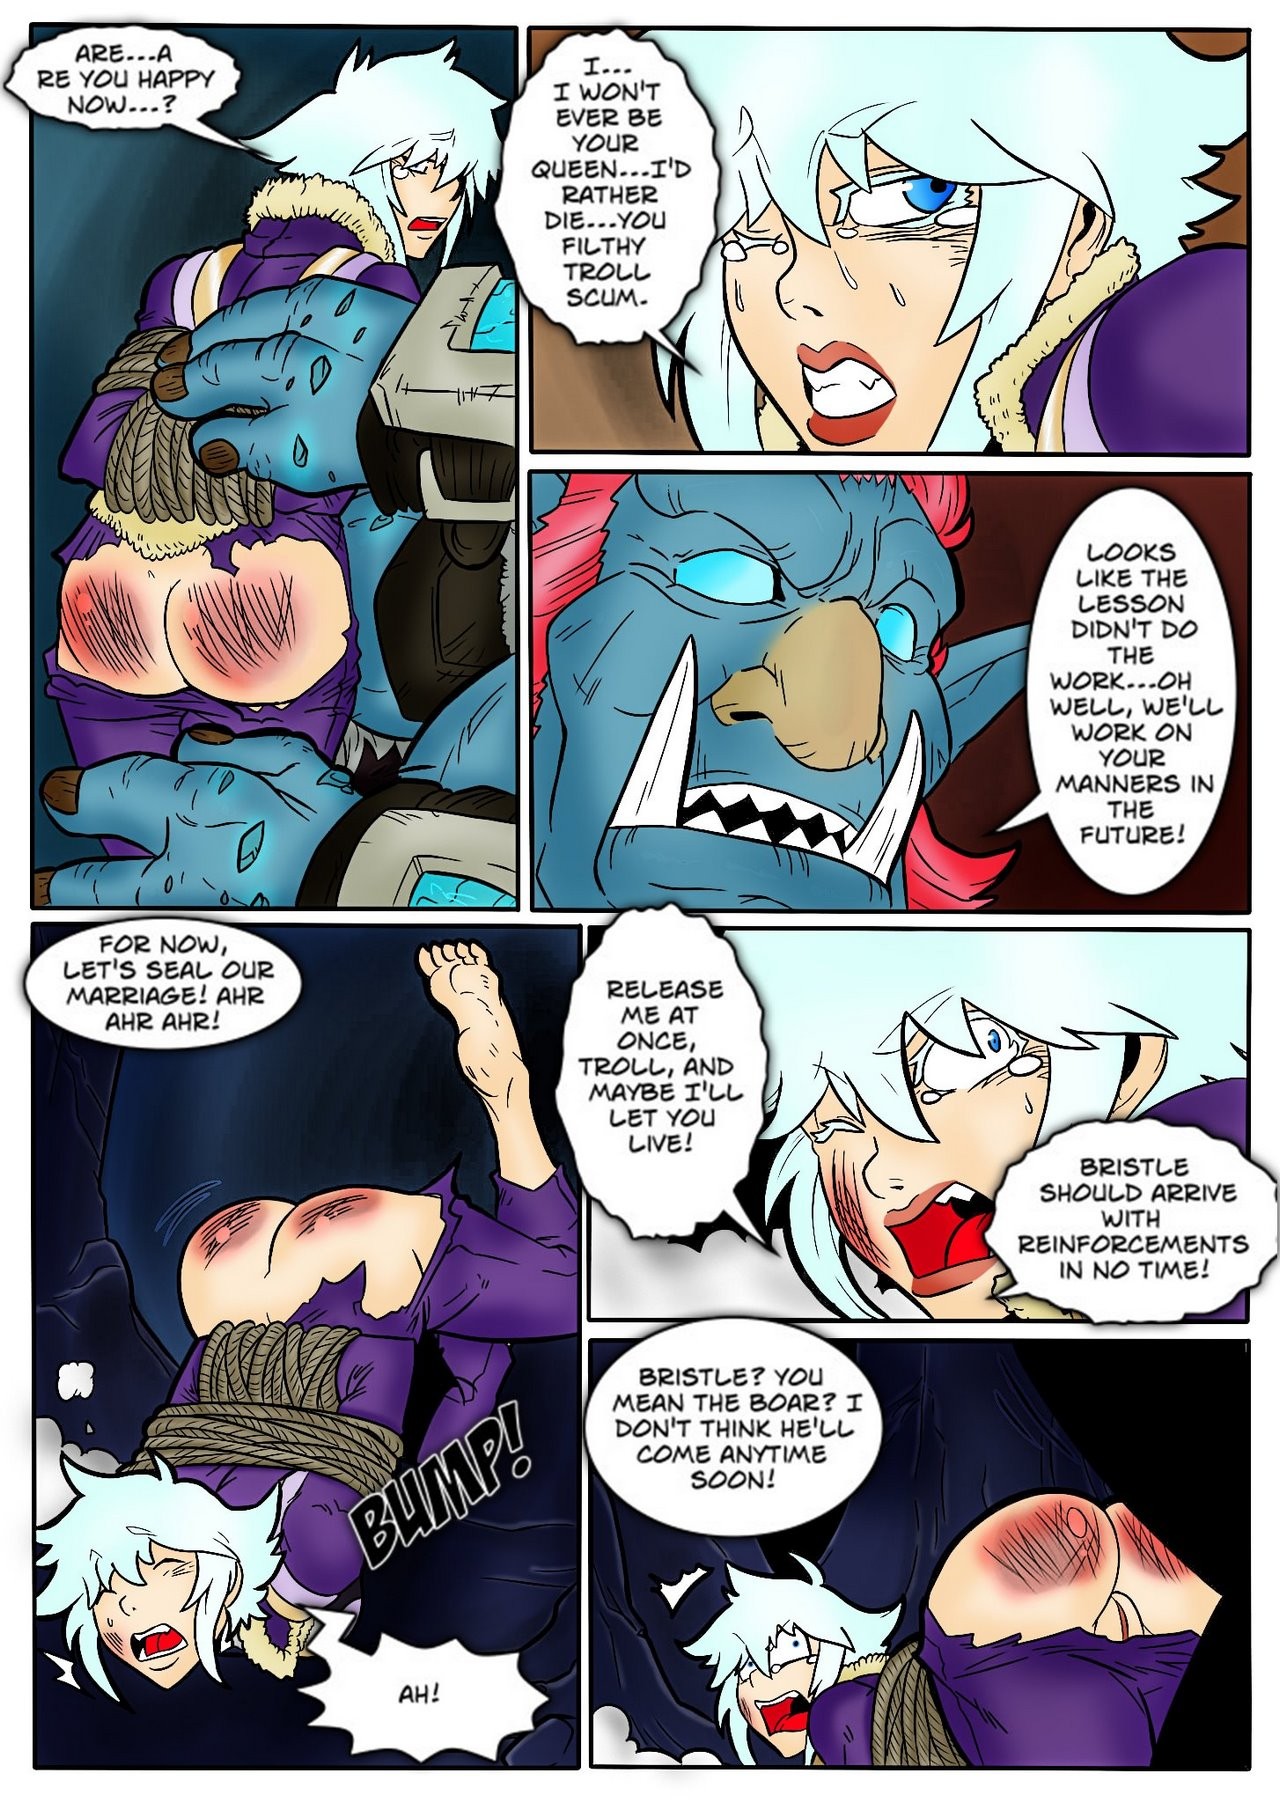 Tales of the Troll King ch. 1 - 3 ] [Colorized] porn comic picture 27